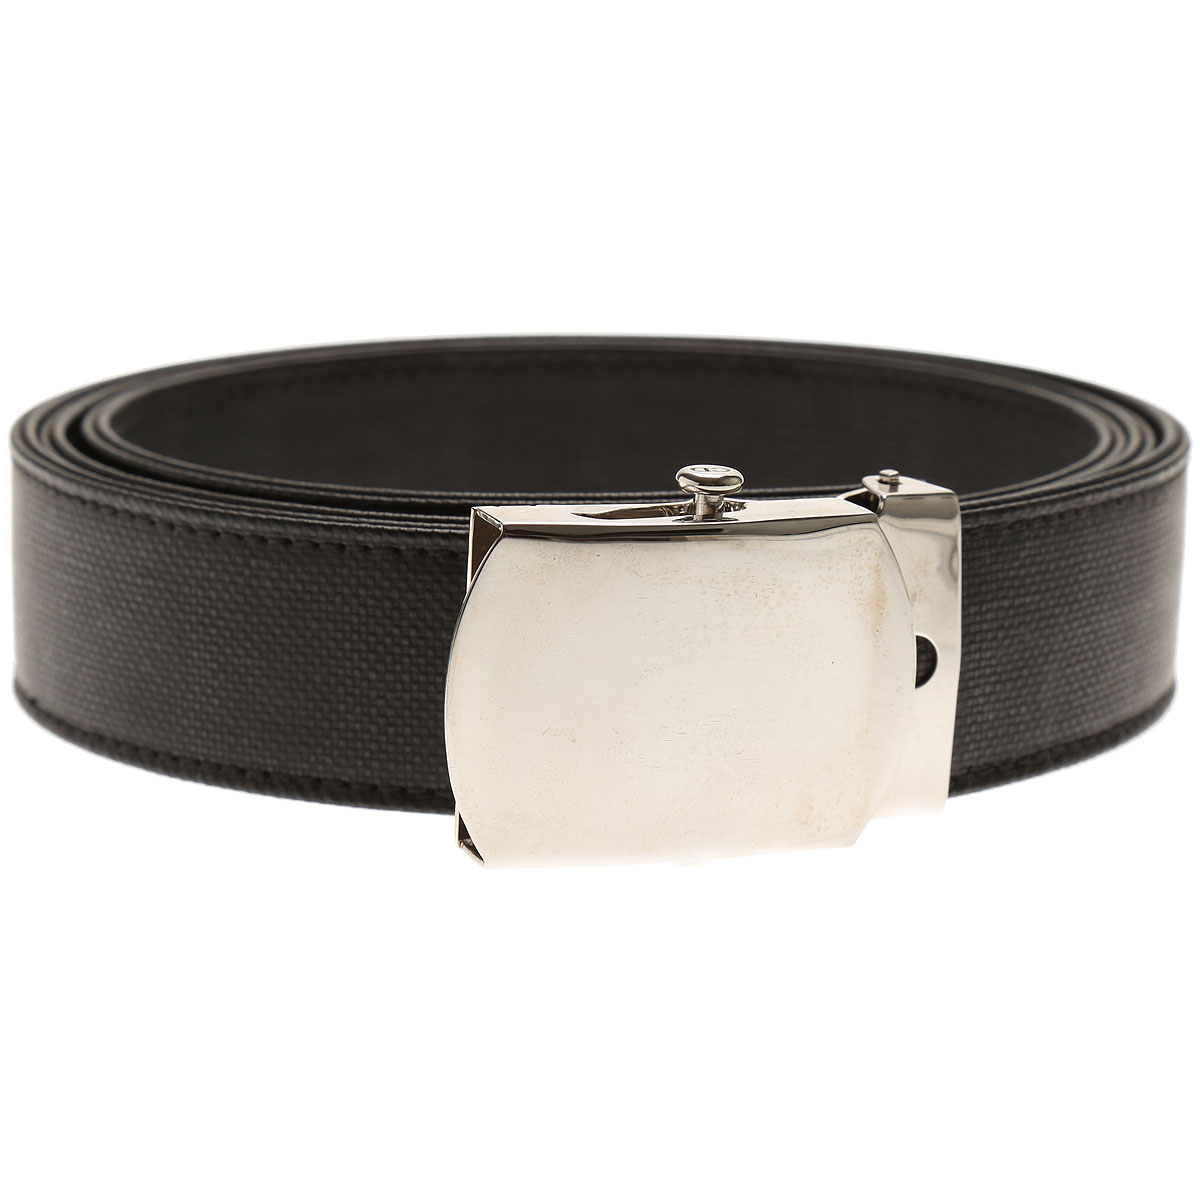 Mens Belts Christian Dior, Style code: dloc4220p-toi-nero